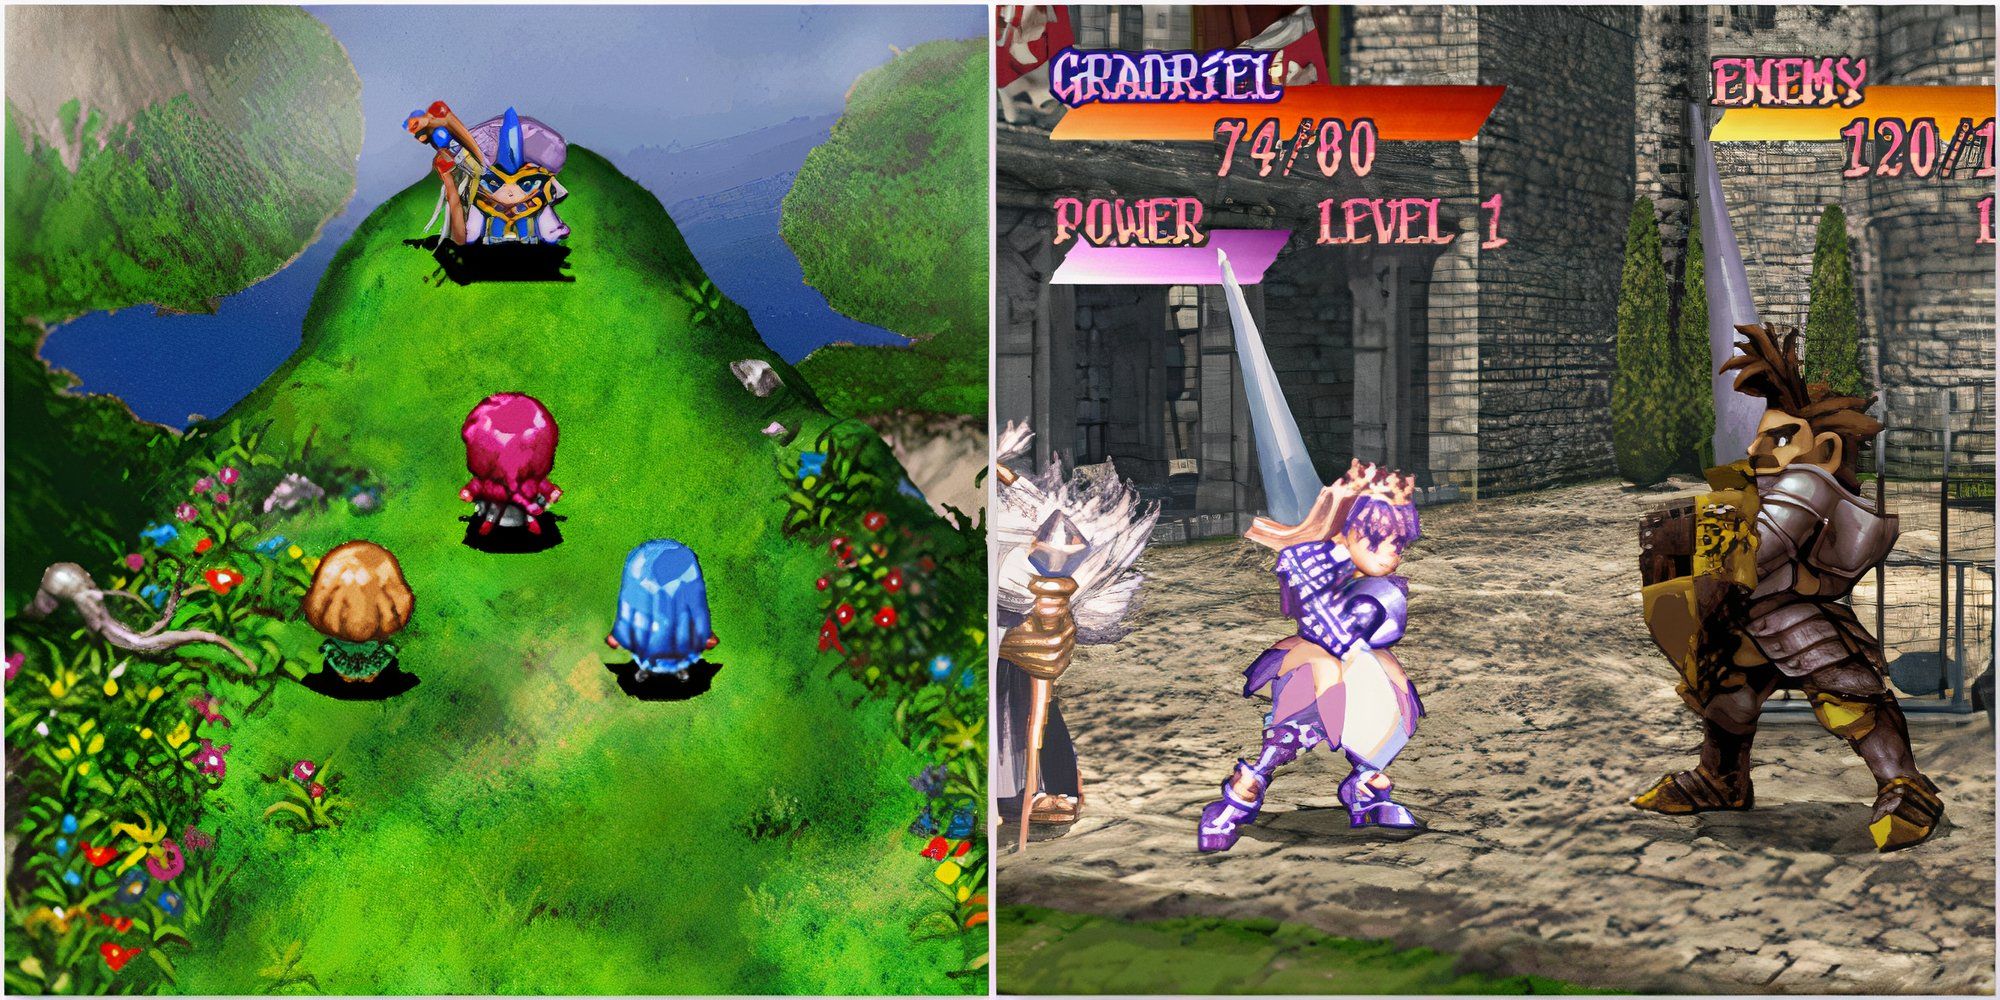 A scene featuring characters in Magic Knight Rayearth and Fighting a battle in Princess Crown